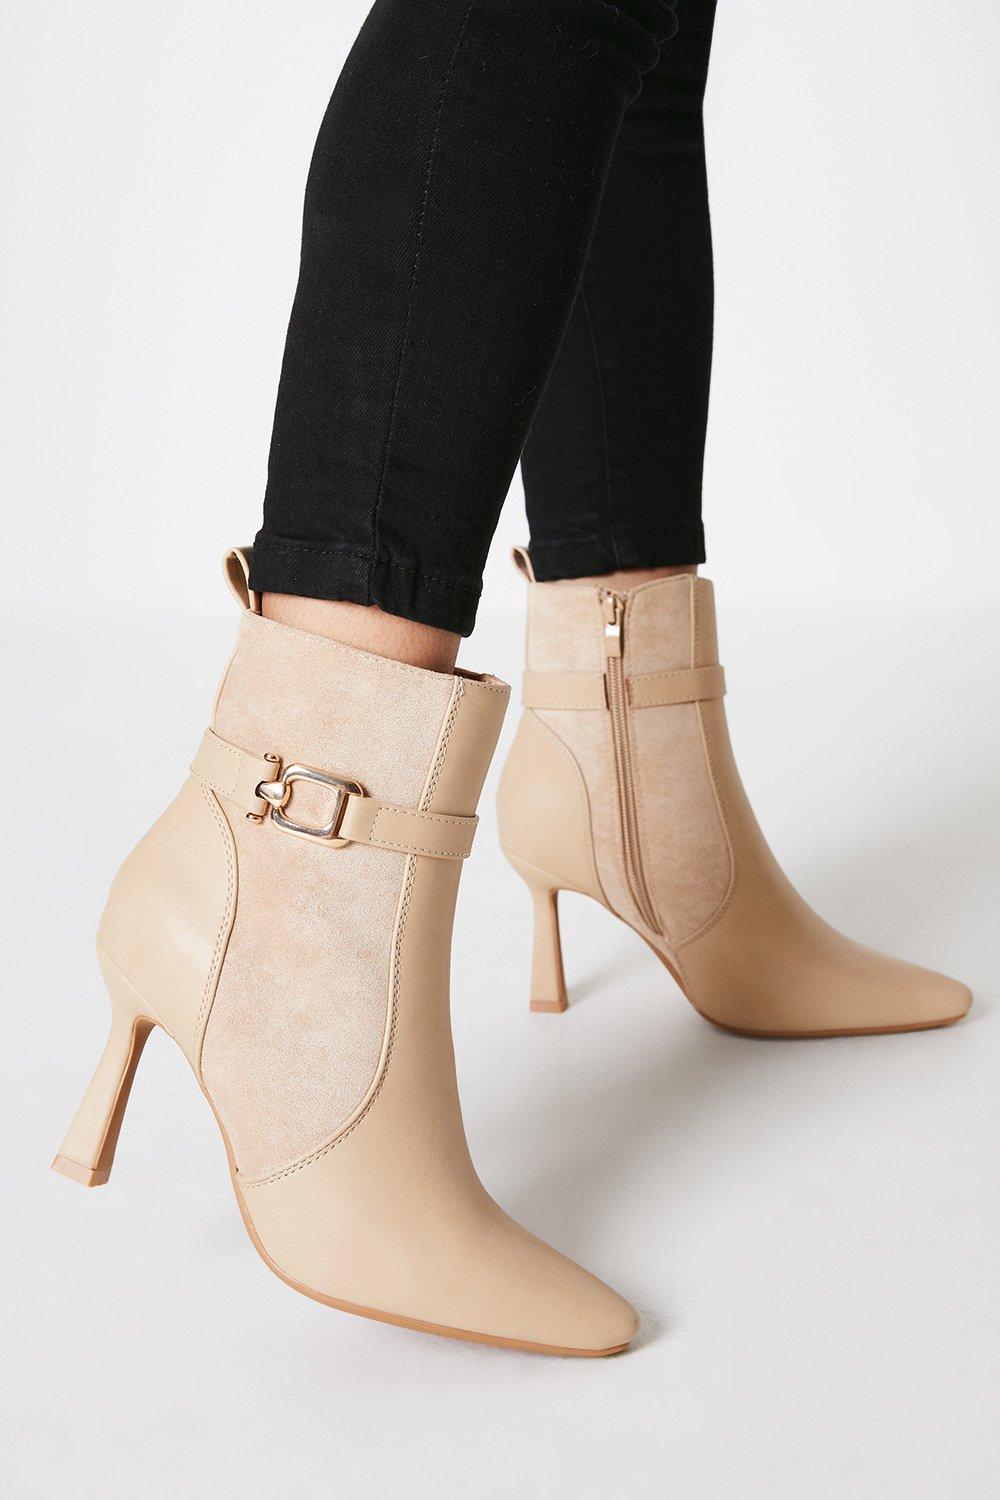 Women's Faith: Madra Pointed Buckle High Heeled Ankle Boots - beige - 6